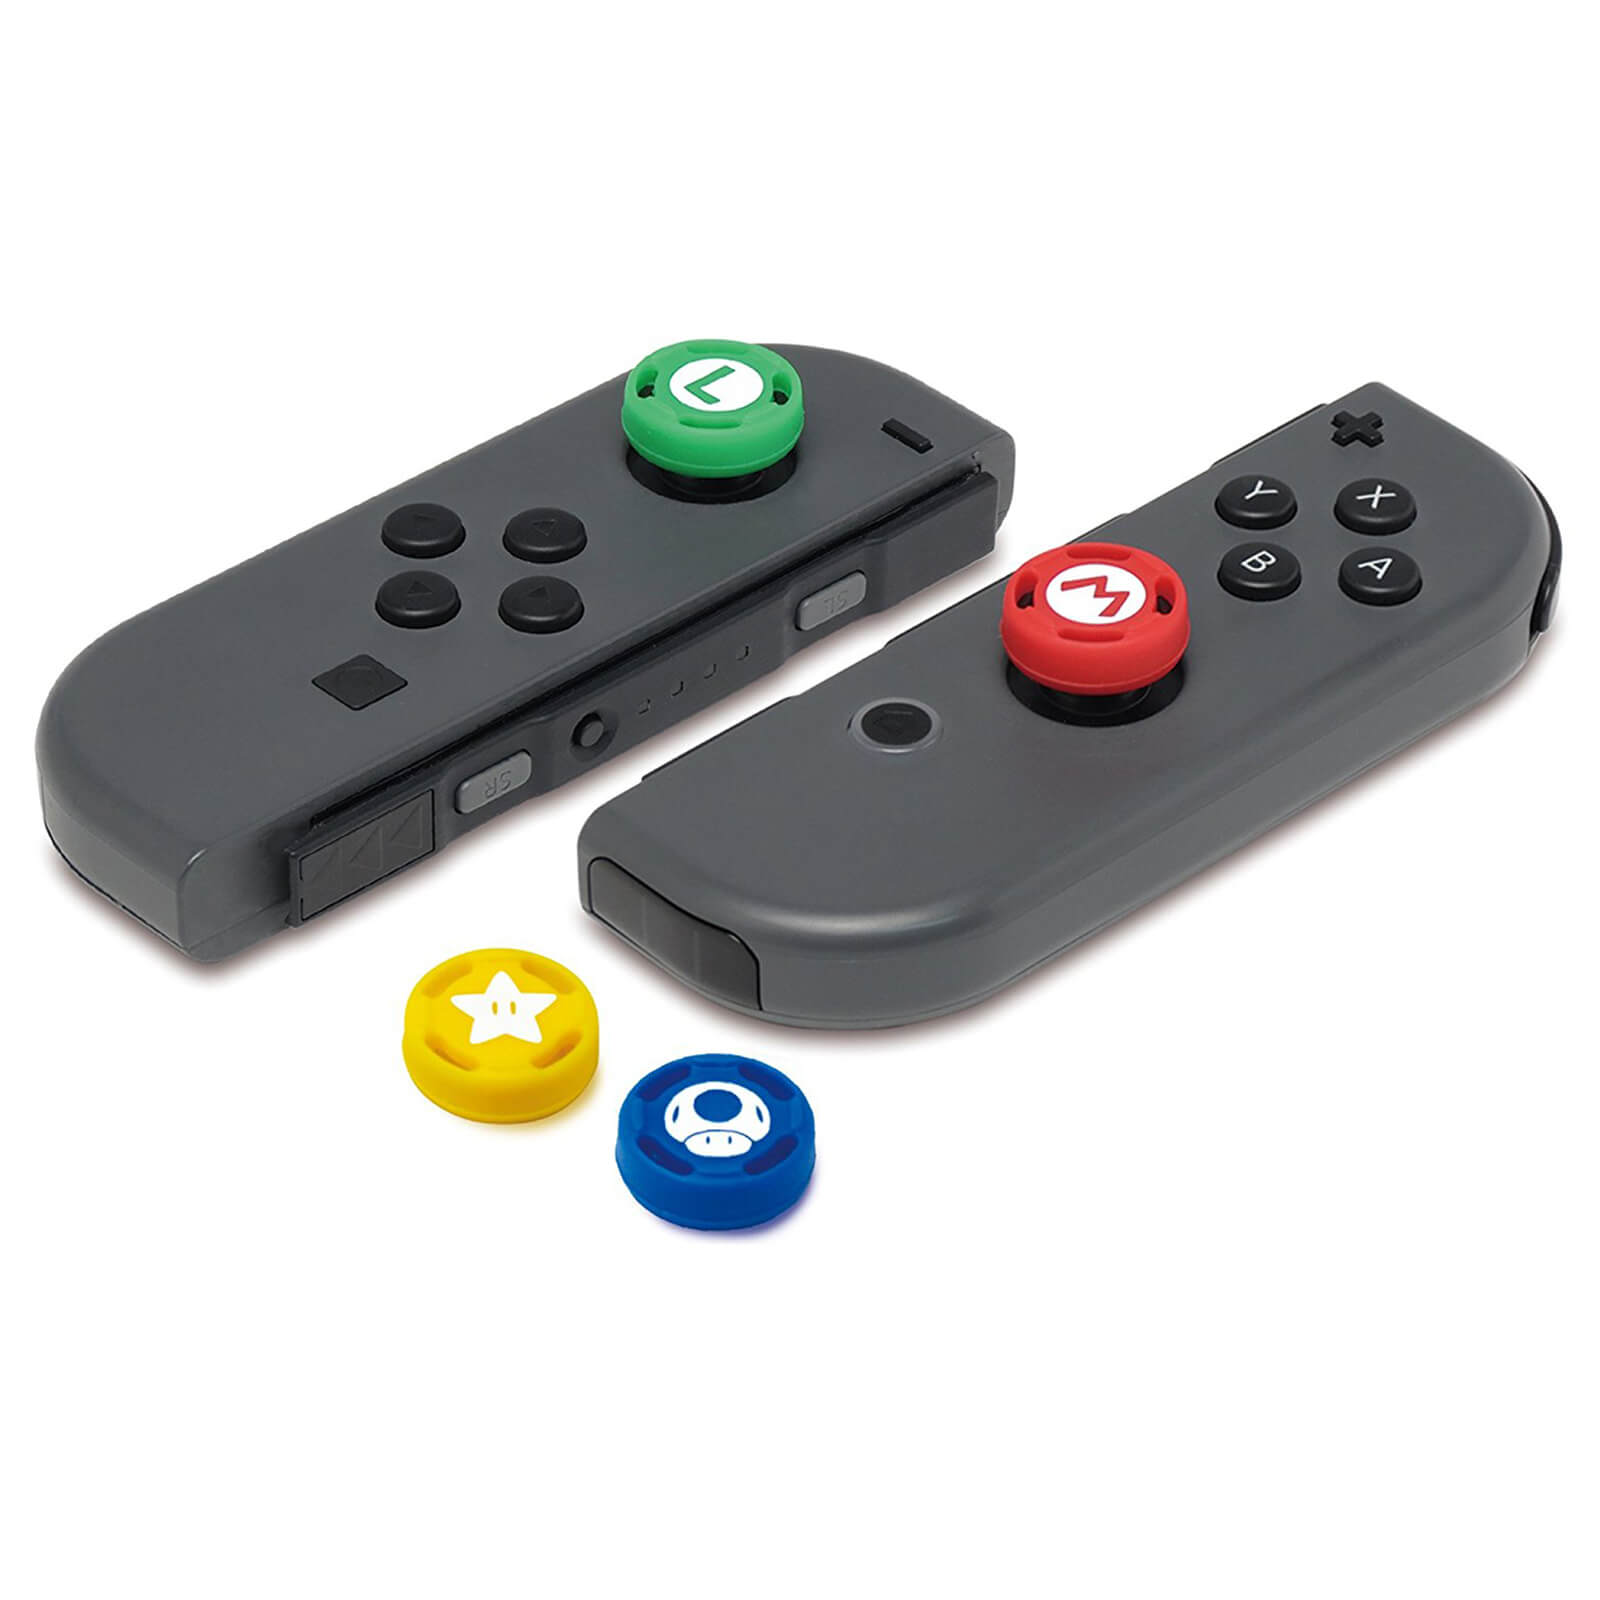 joystick covers for nintendo switch